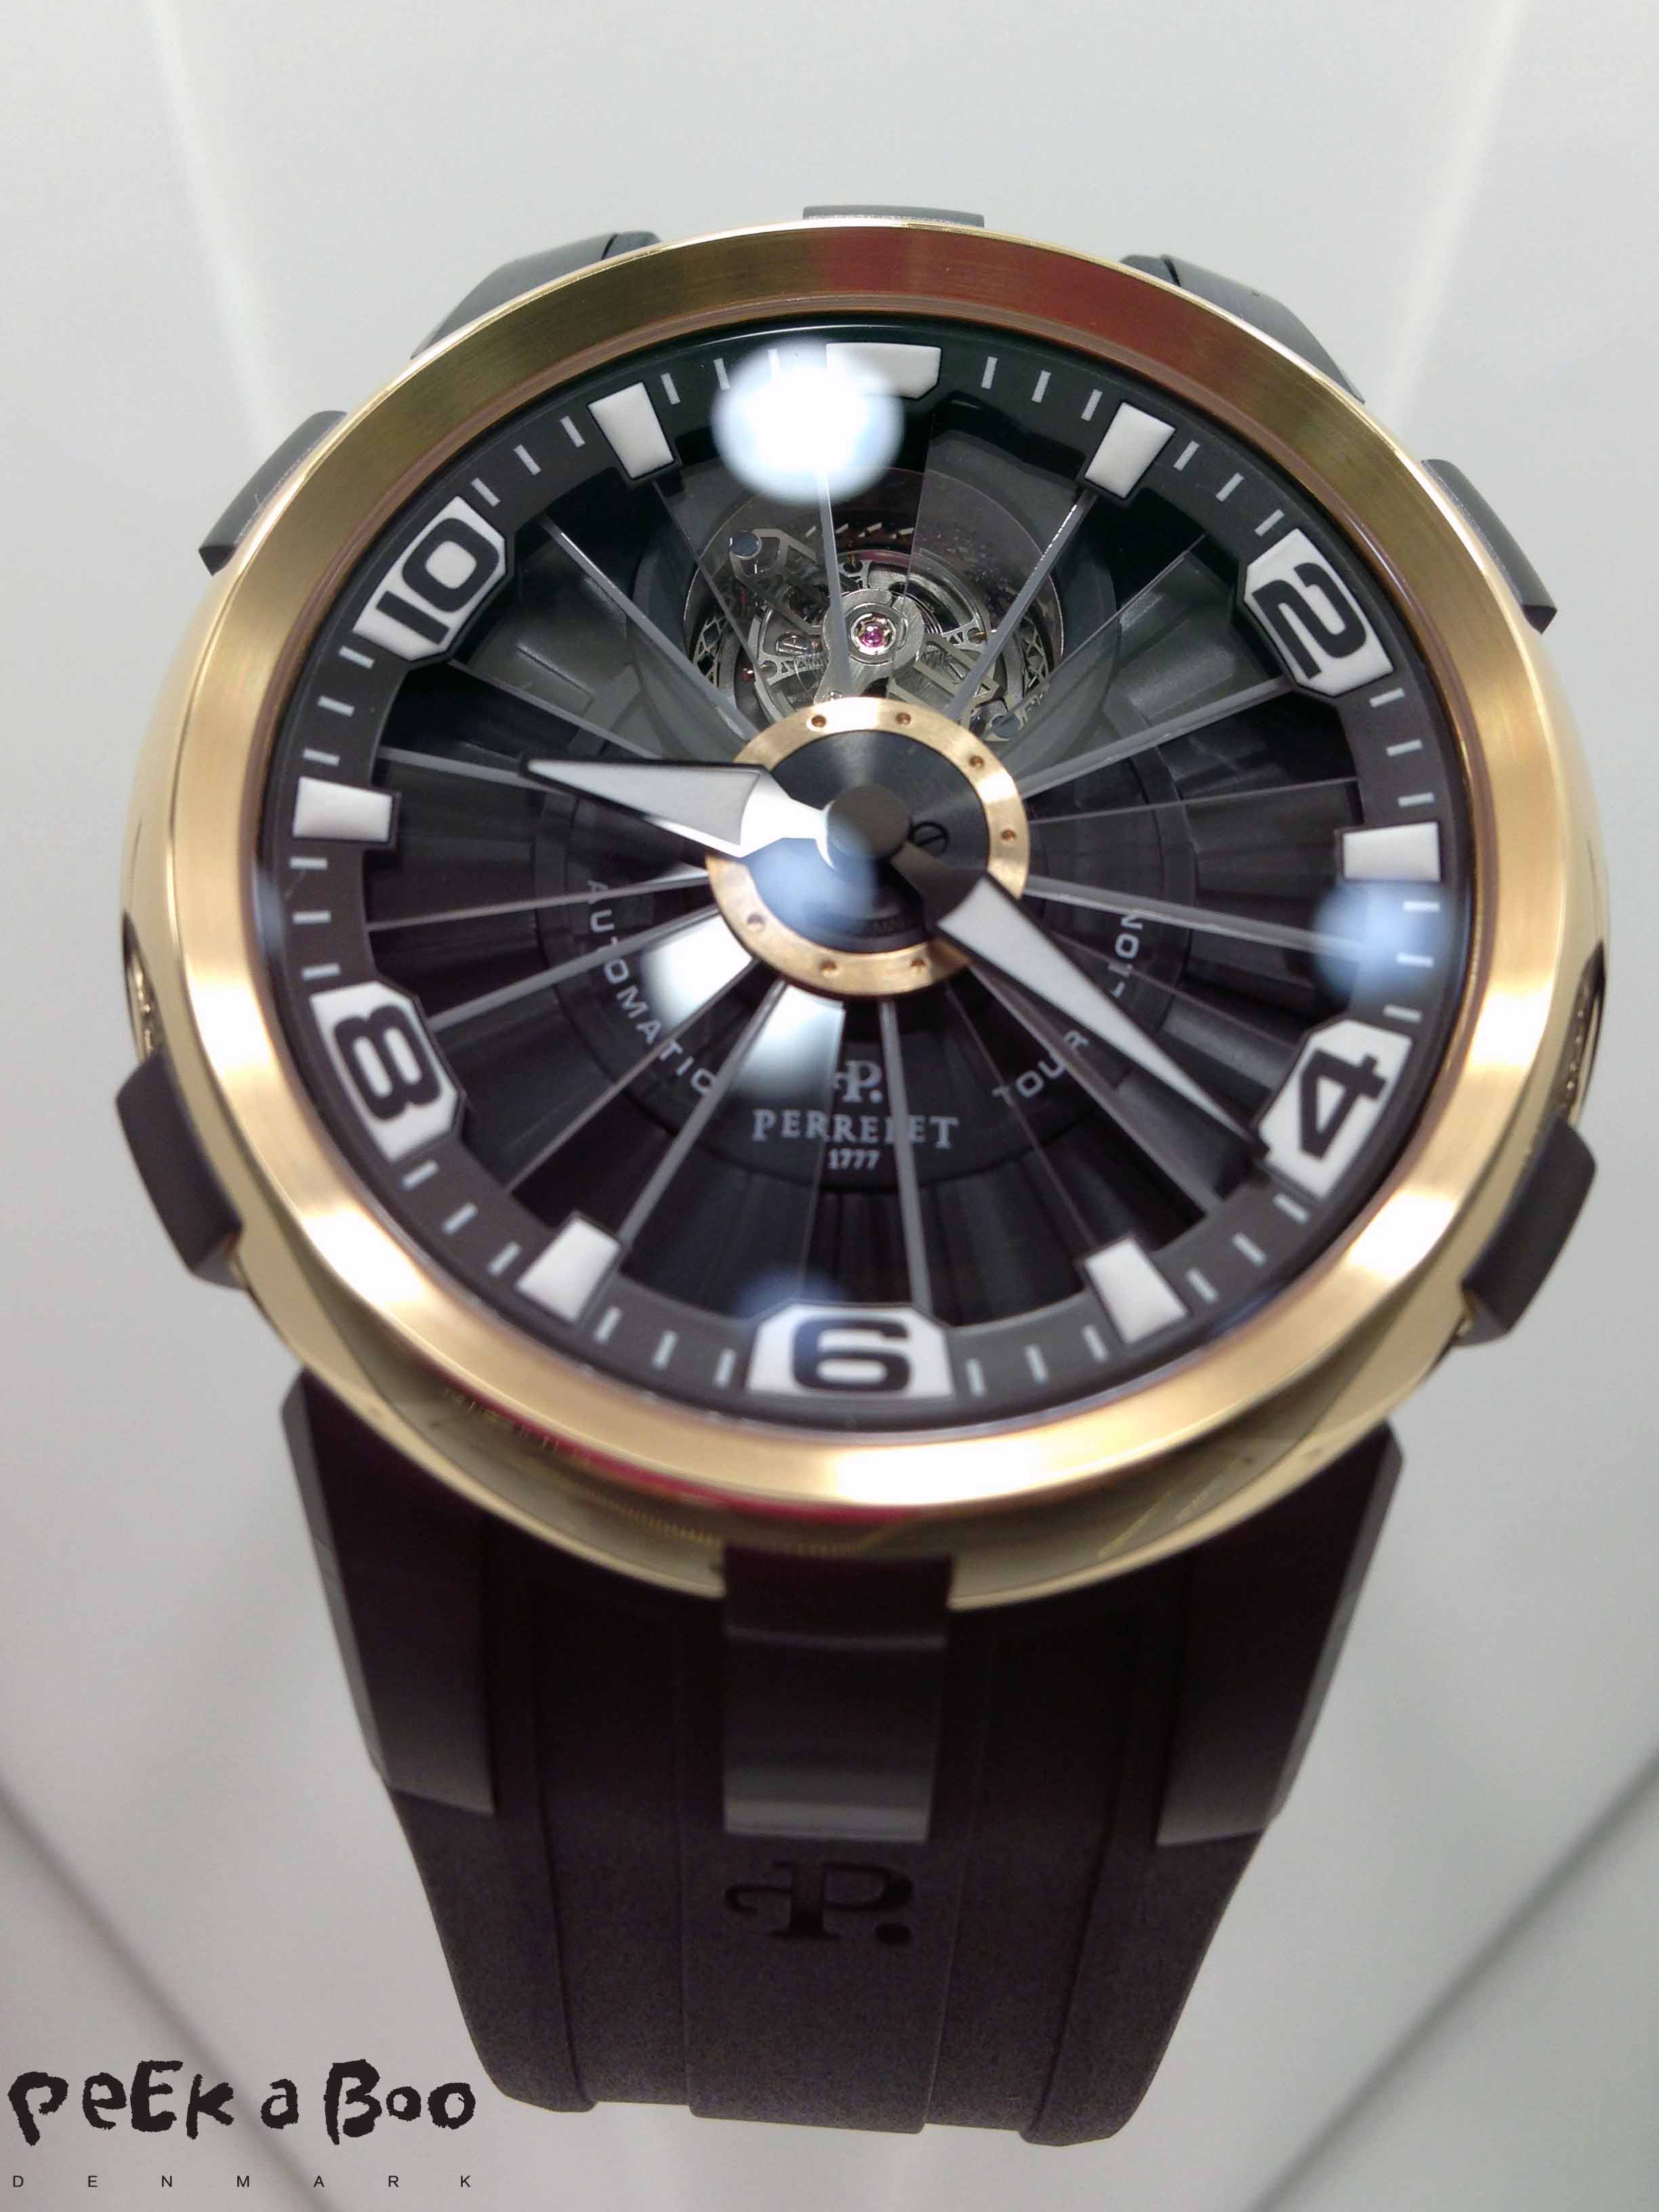 Very nice Watch from Perrelet. Baselworld 2014.